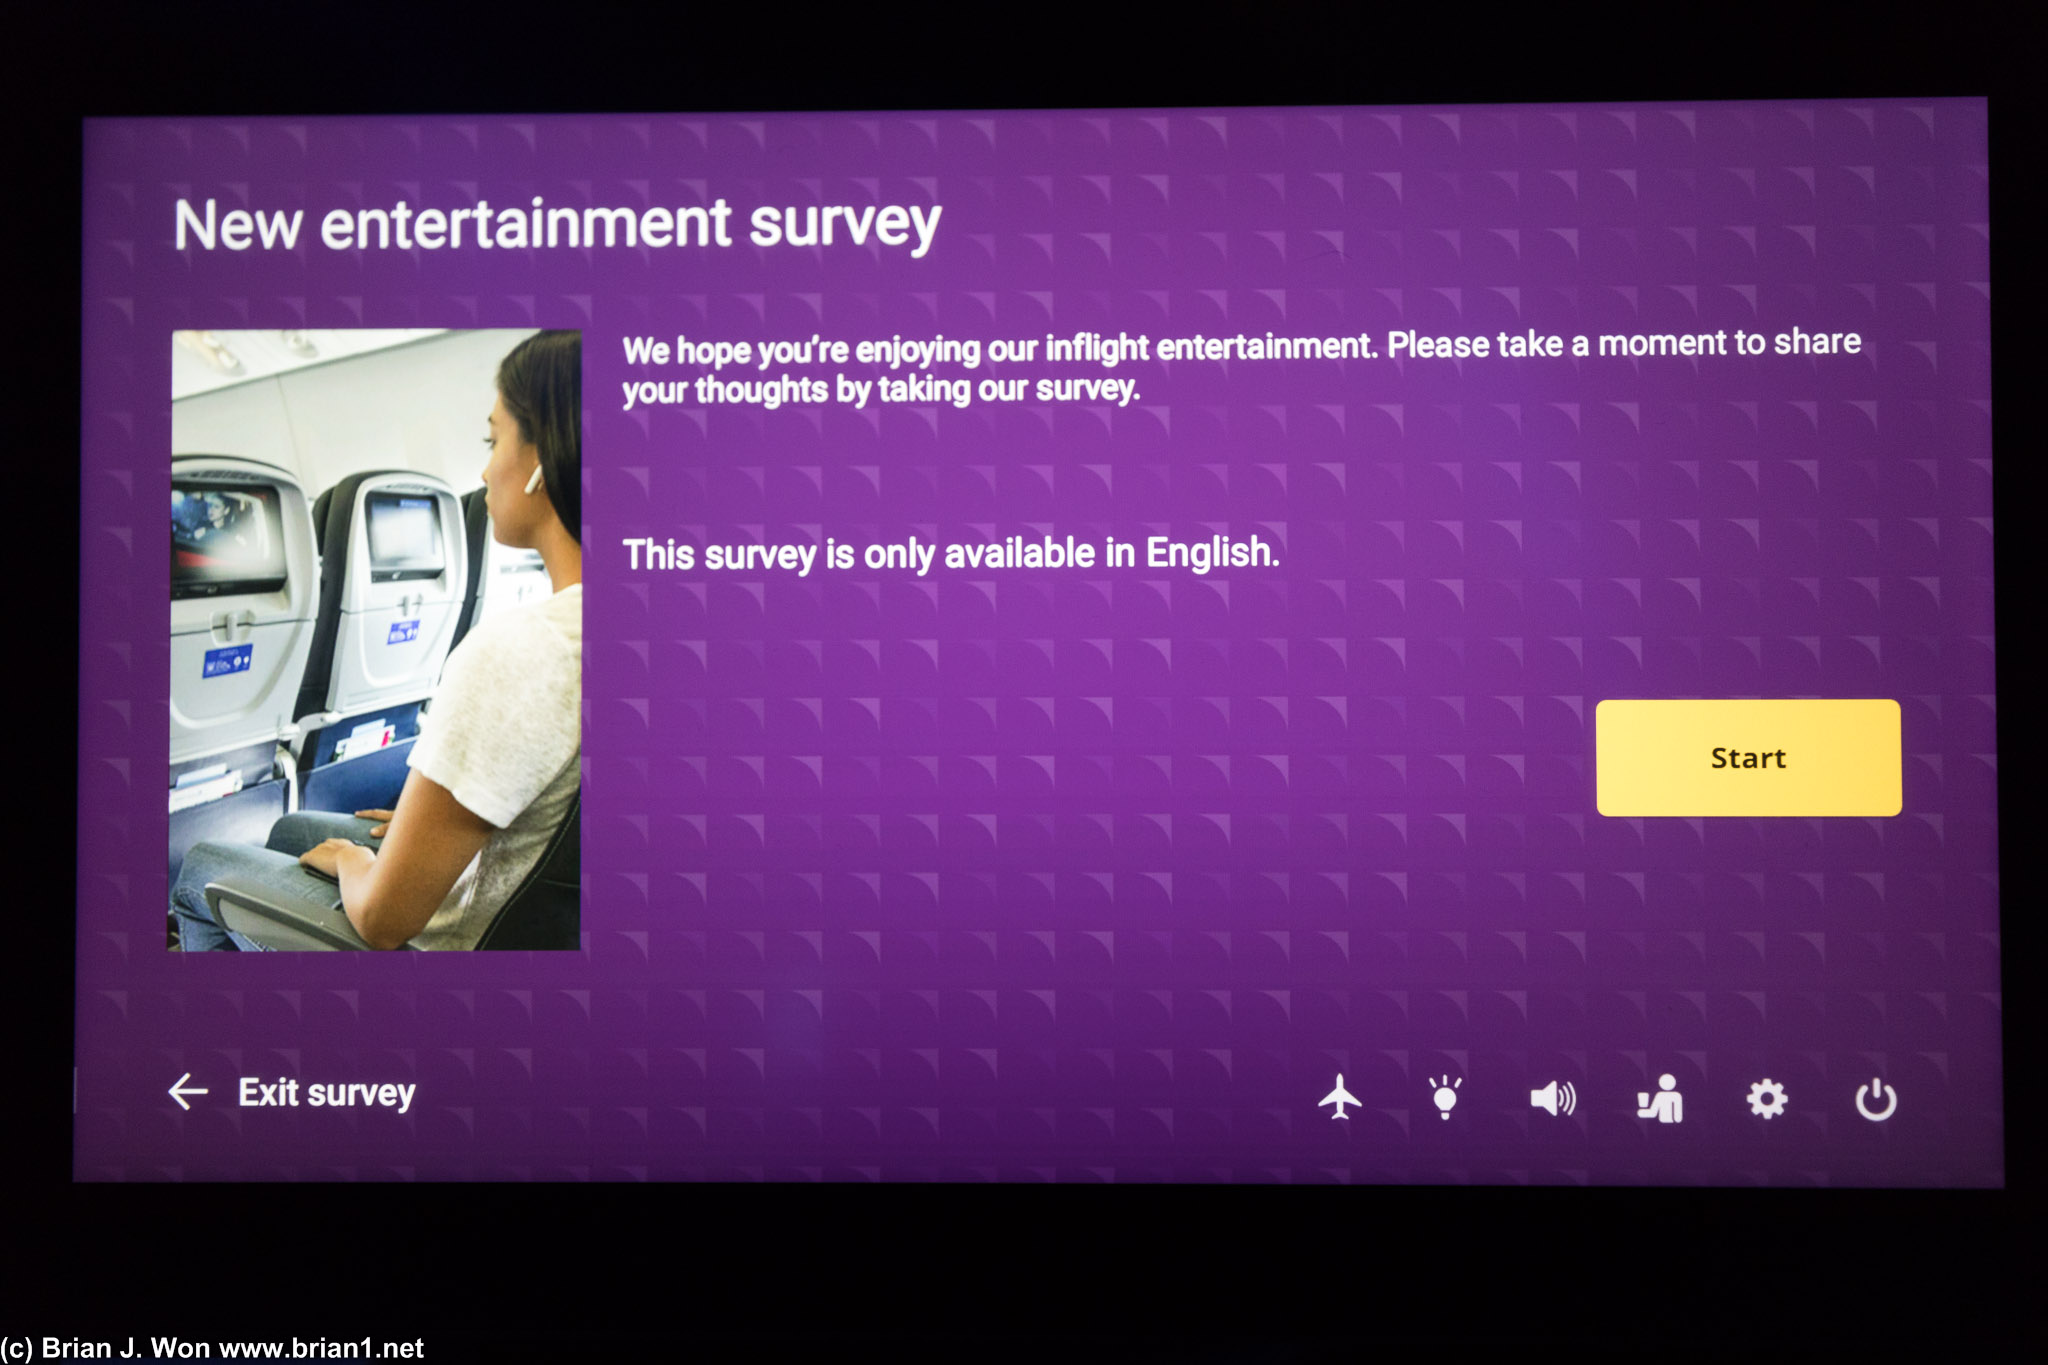 There's a survey?!?!